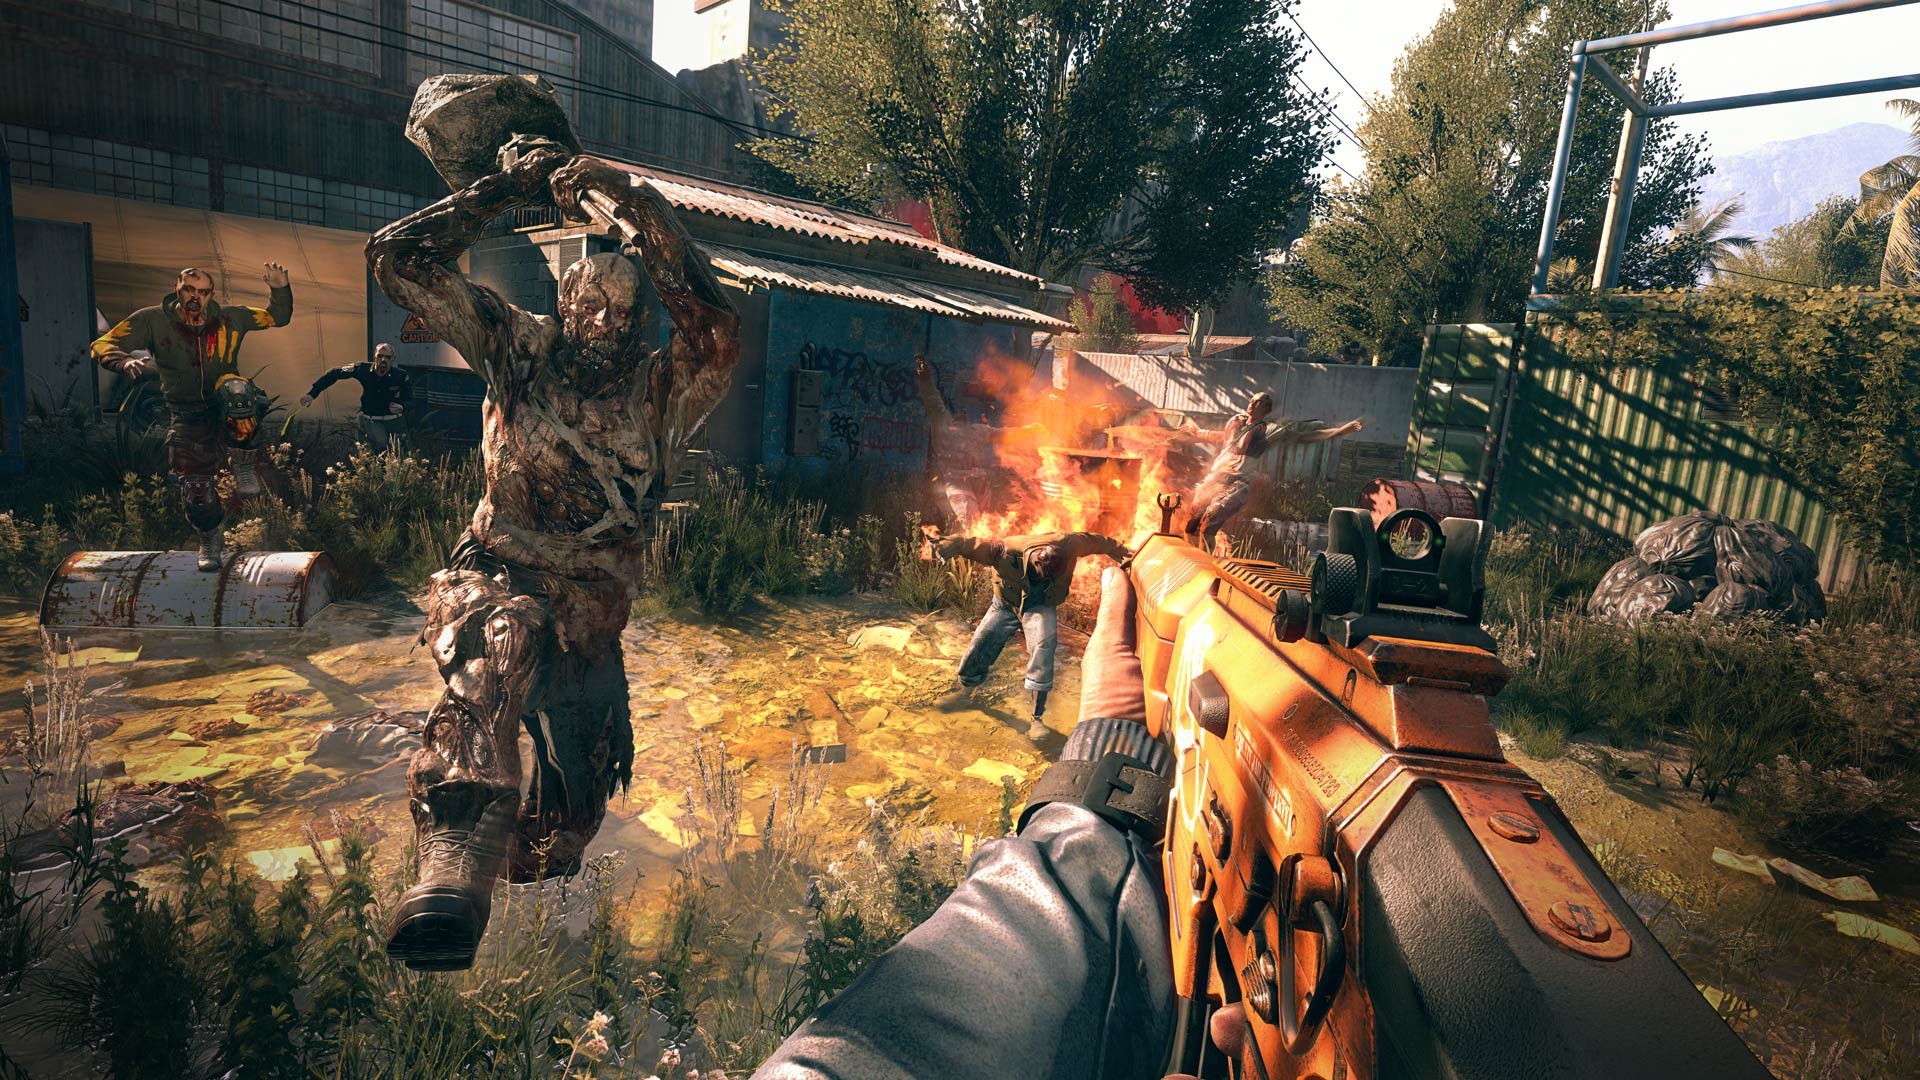 Dying Light: The Following - Enhanced Edition release date